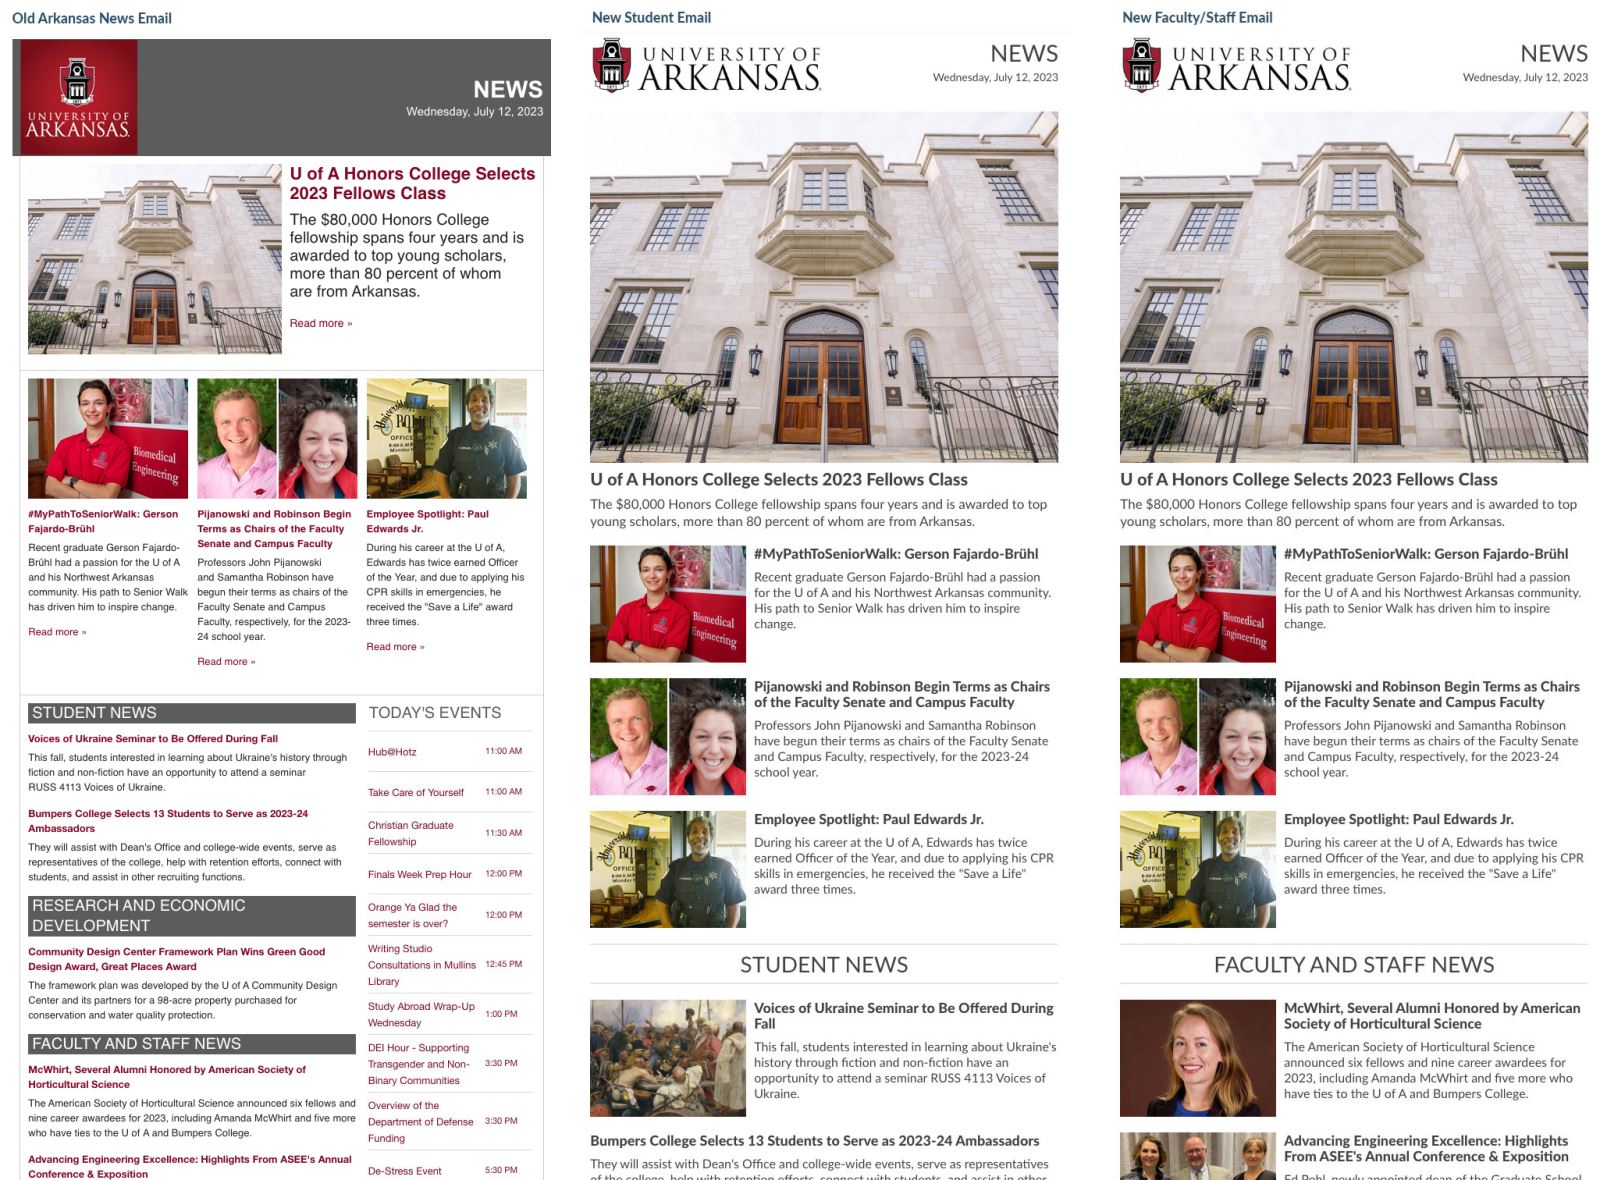 Side-by-side comparisons of the old Arkansas news email with two new versions